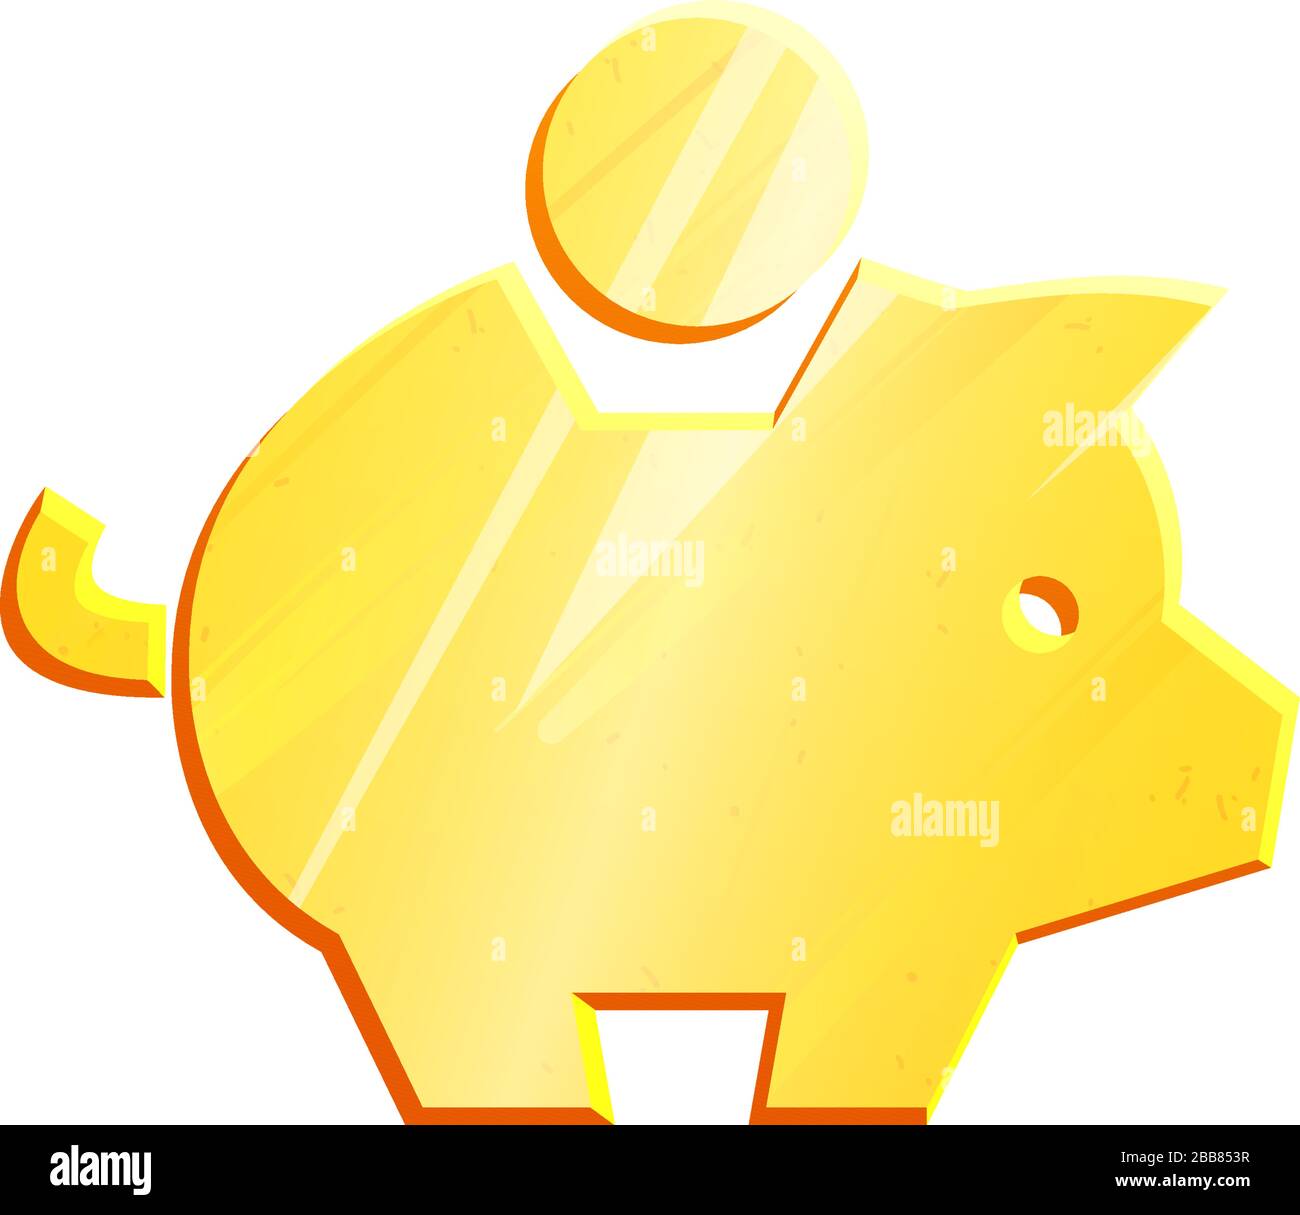 Gold piggy bank savings symbol. Banking concept. Money save icon. Economic growth sign. Cash income, investment. Home budget. Earnings money. Metal moneybox vector, isolated on white background. Stock Vector